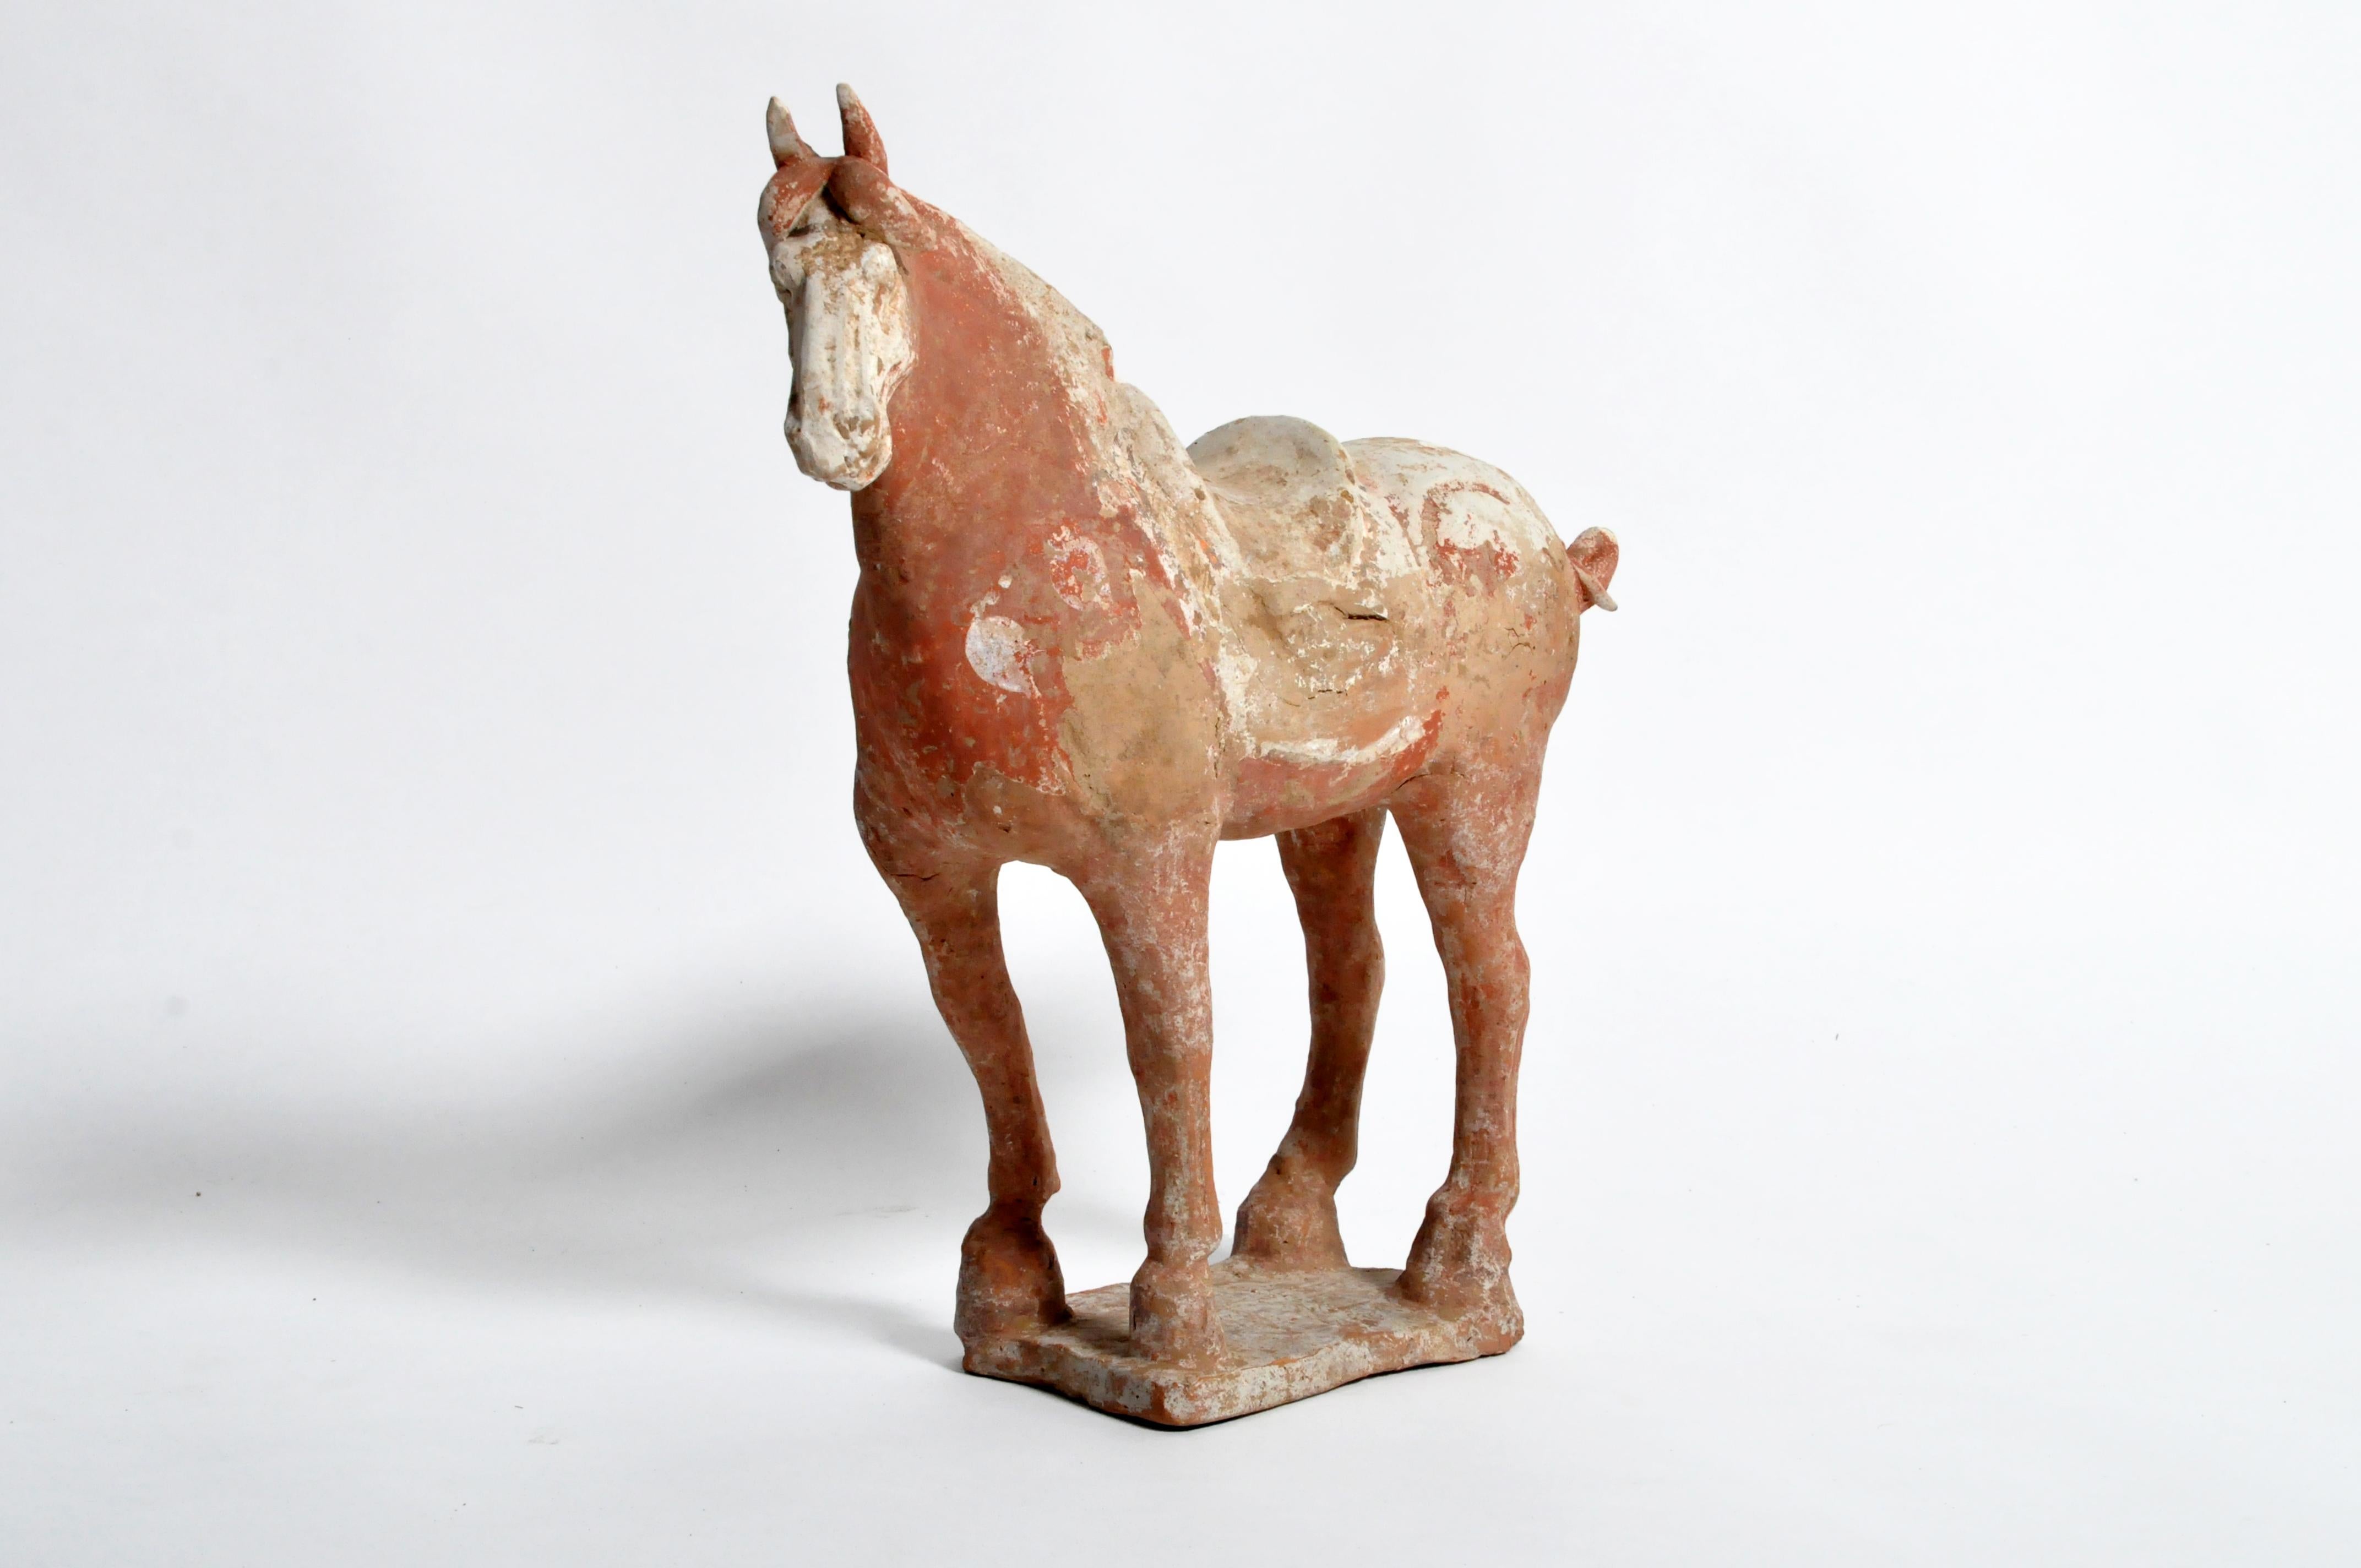 Tang Dynasty (618-906 A.D.). Horses were powerful symbols of wealth and social position and were often buried in effigy. The horse also had symbolic connotations, for example, fidelity and virtue. This horse was found in Shaanxi province, on the